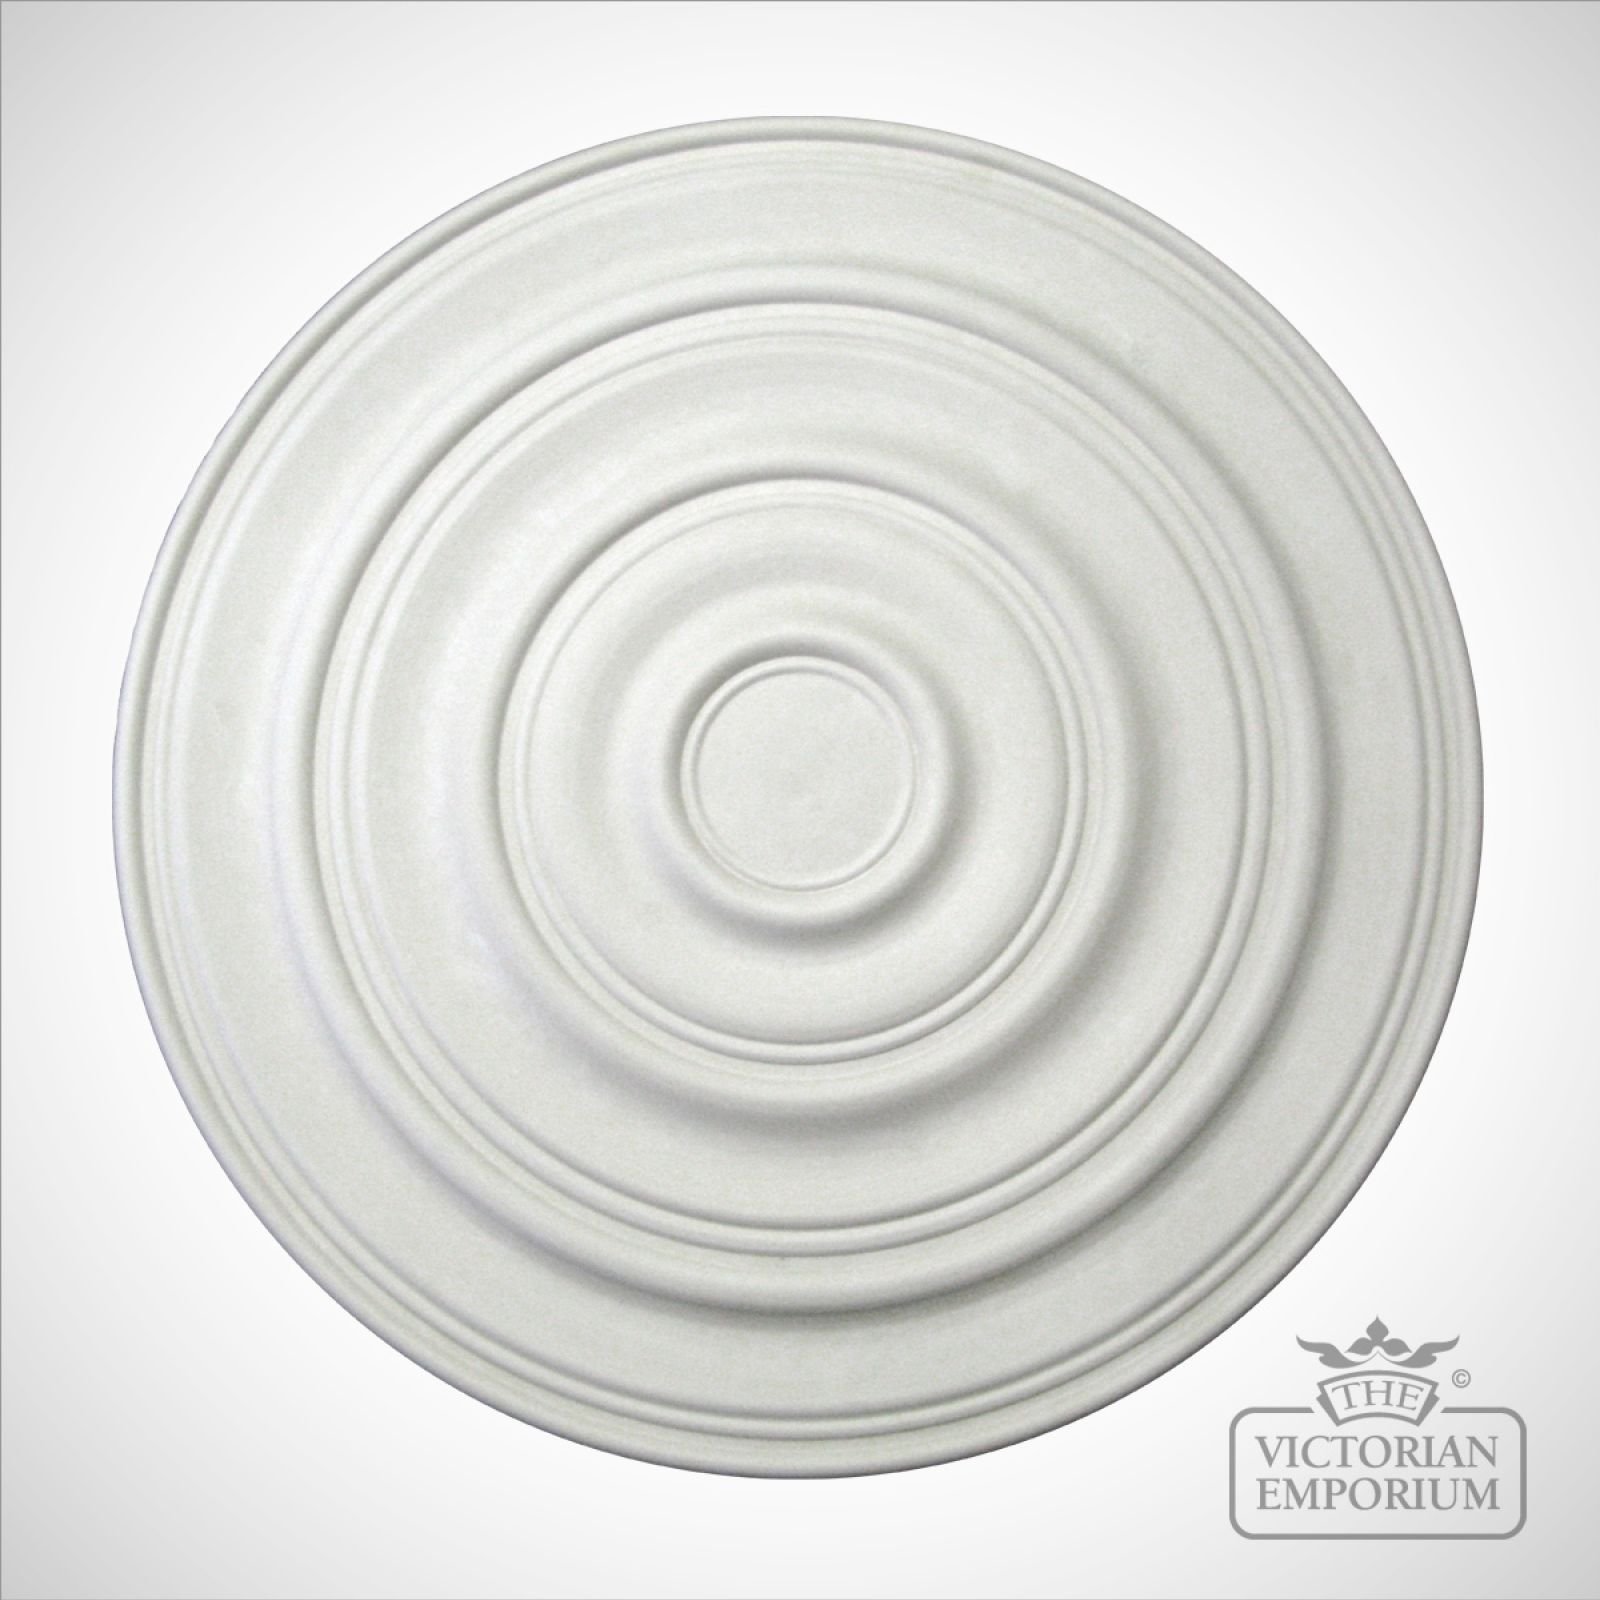 Victorian ceiling rose - Style 25 - 920mm diameter